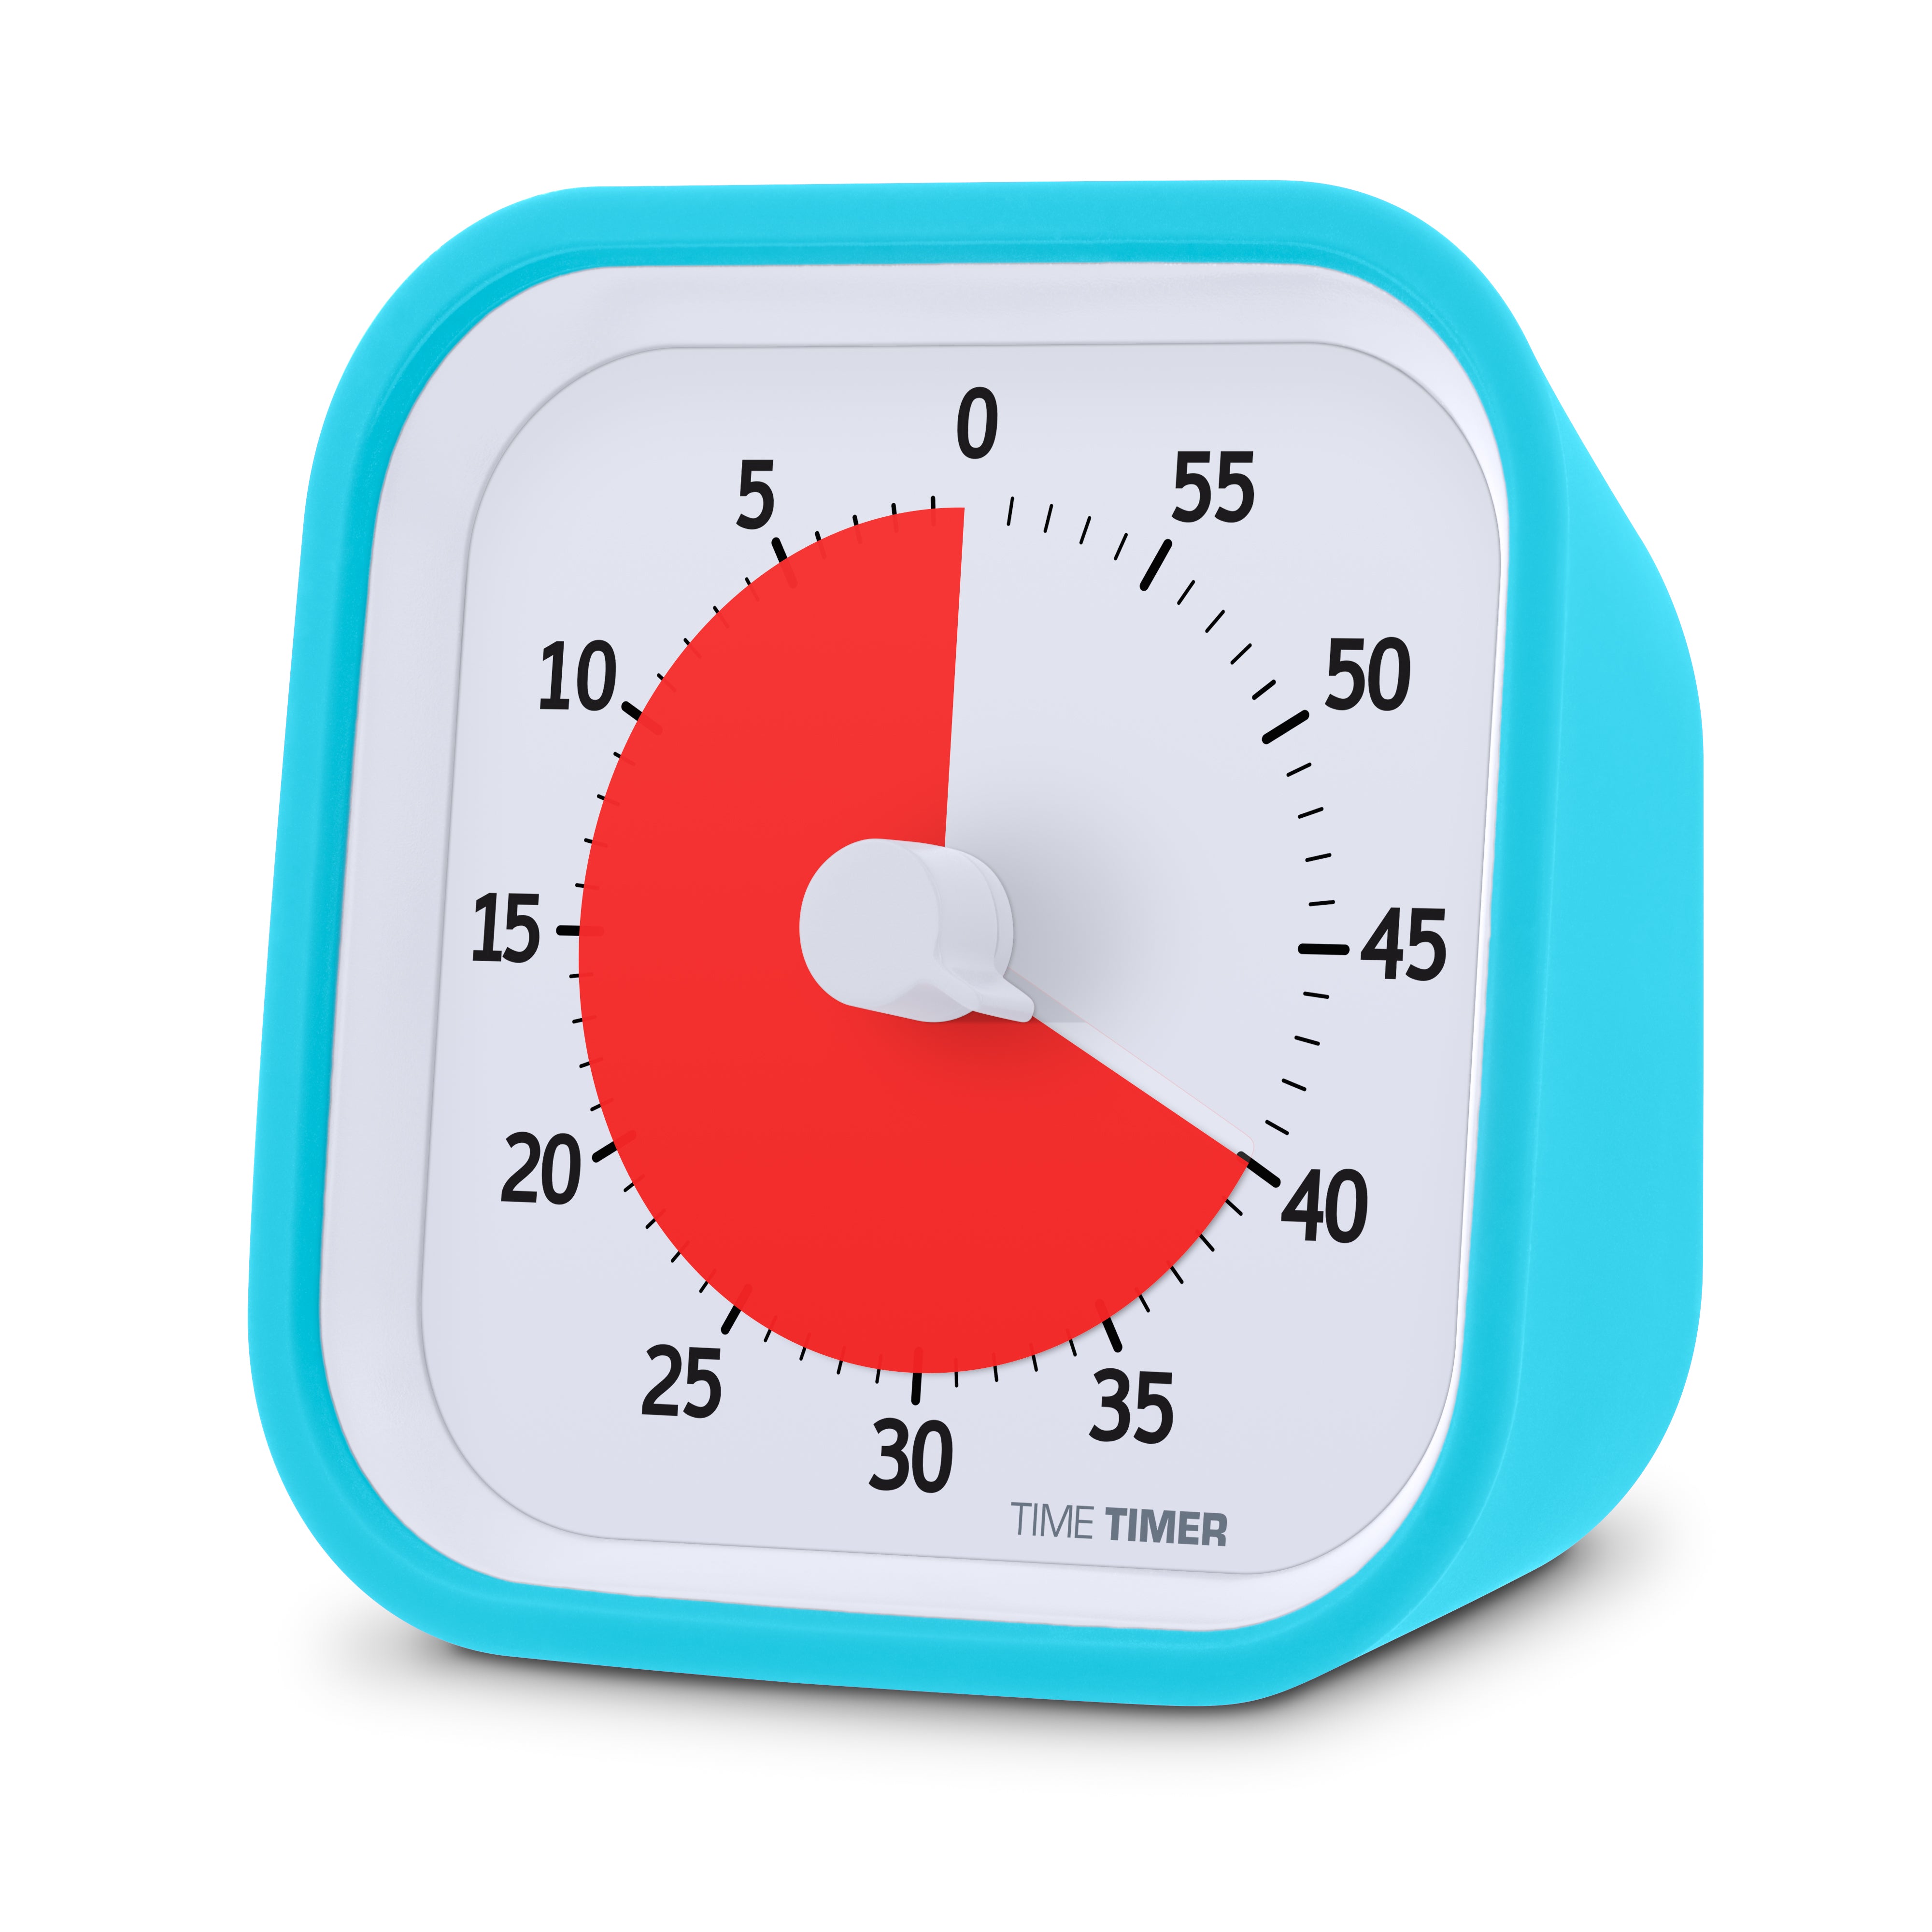 A Visual Timer For Focus and Productivity  The Original Visual Timer – Time  Timer